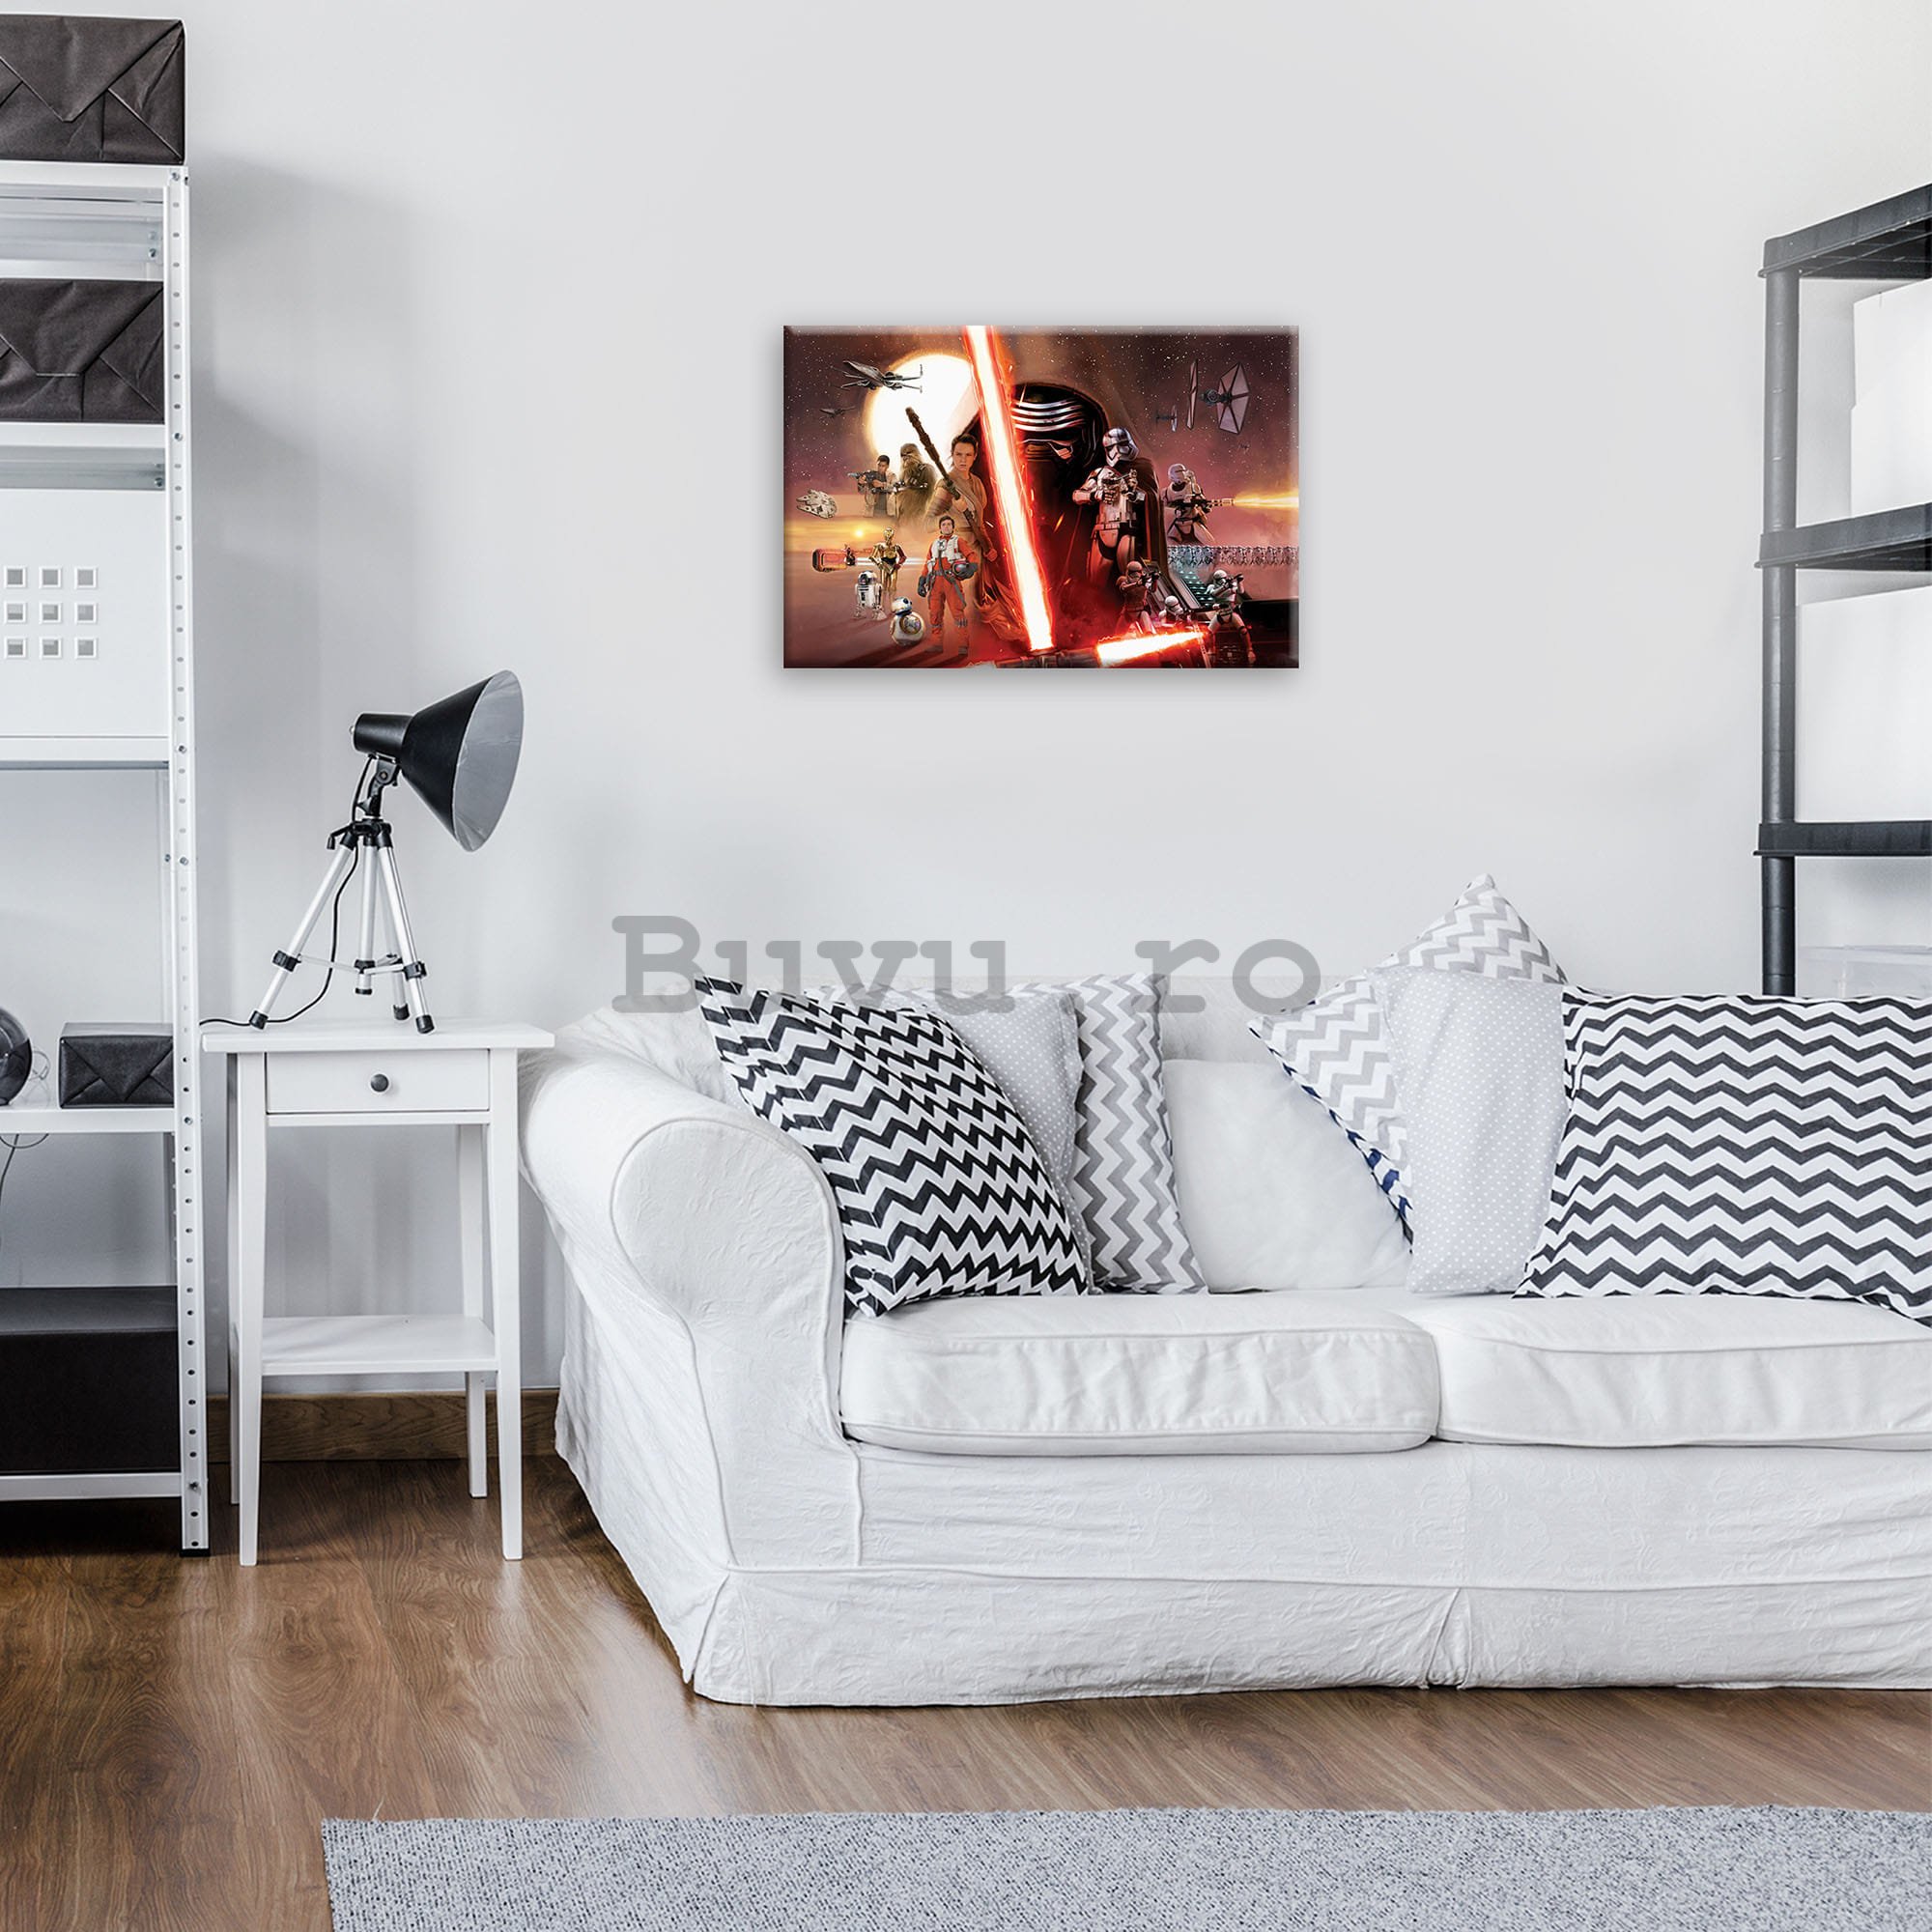 Tablou canvas: Star Wars The Force Awakens (1) - 40x60 cm